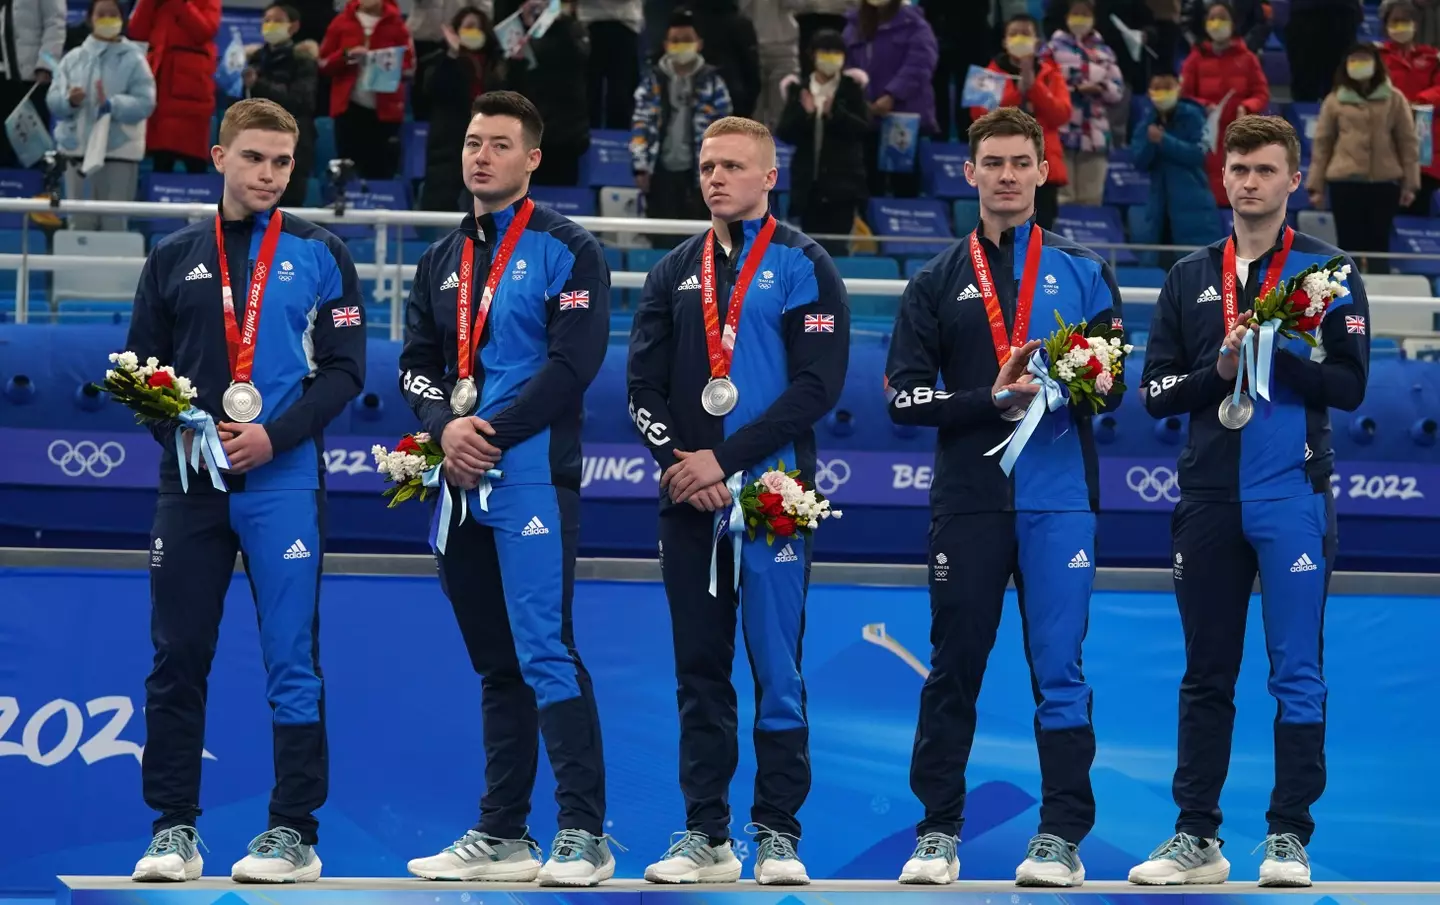 Ross Whyte, Hammy McMillan, Bobby Lammie, Grant Hardie and Bruce Mouat with their silver medals.